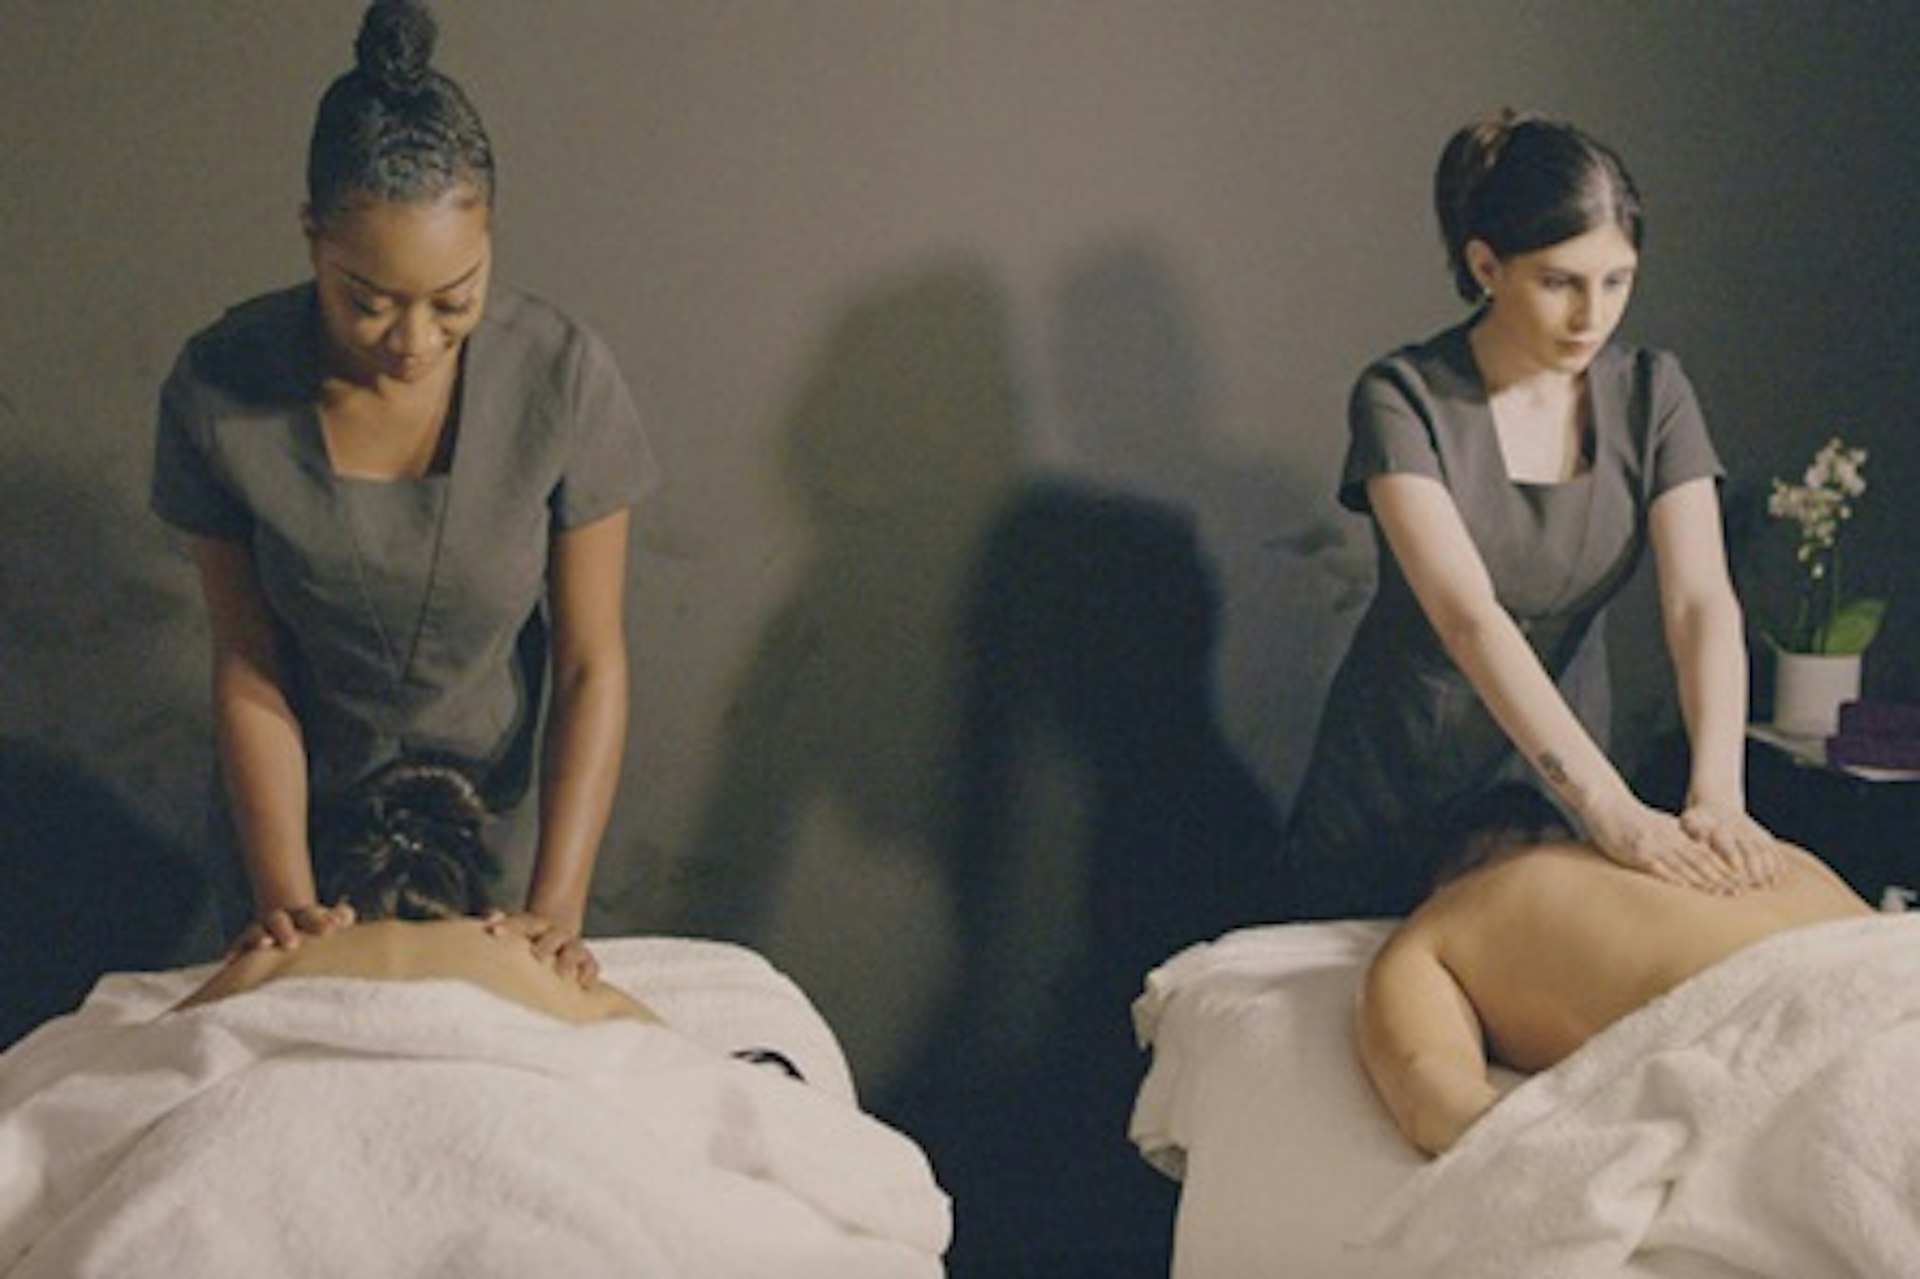 PURE Spa & Beauty Pamper Package including a 60 minute Massage or Facial for Two 2